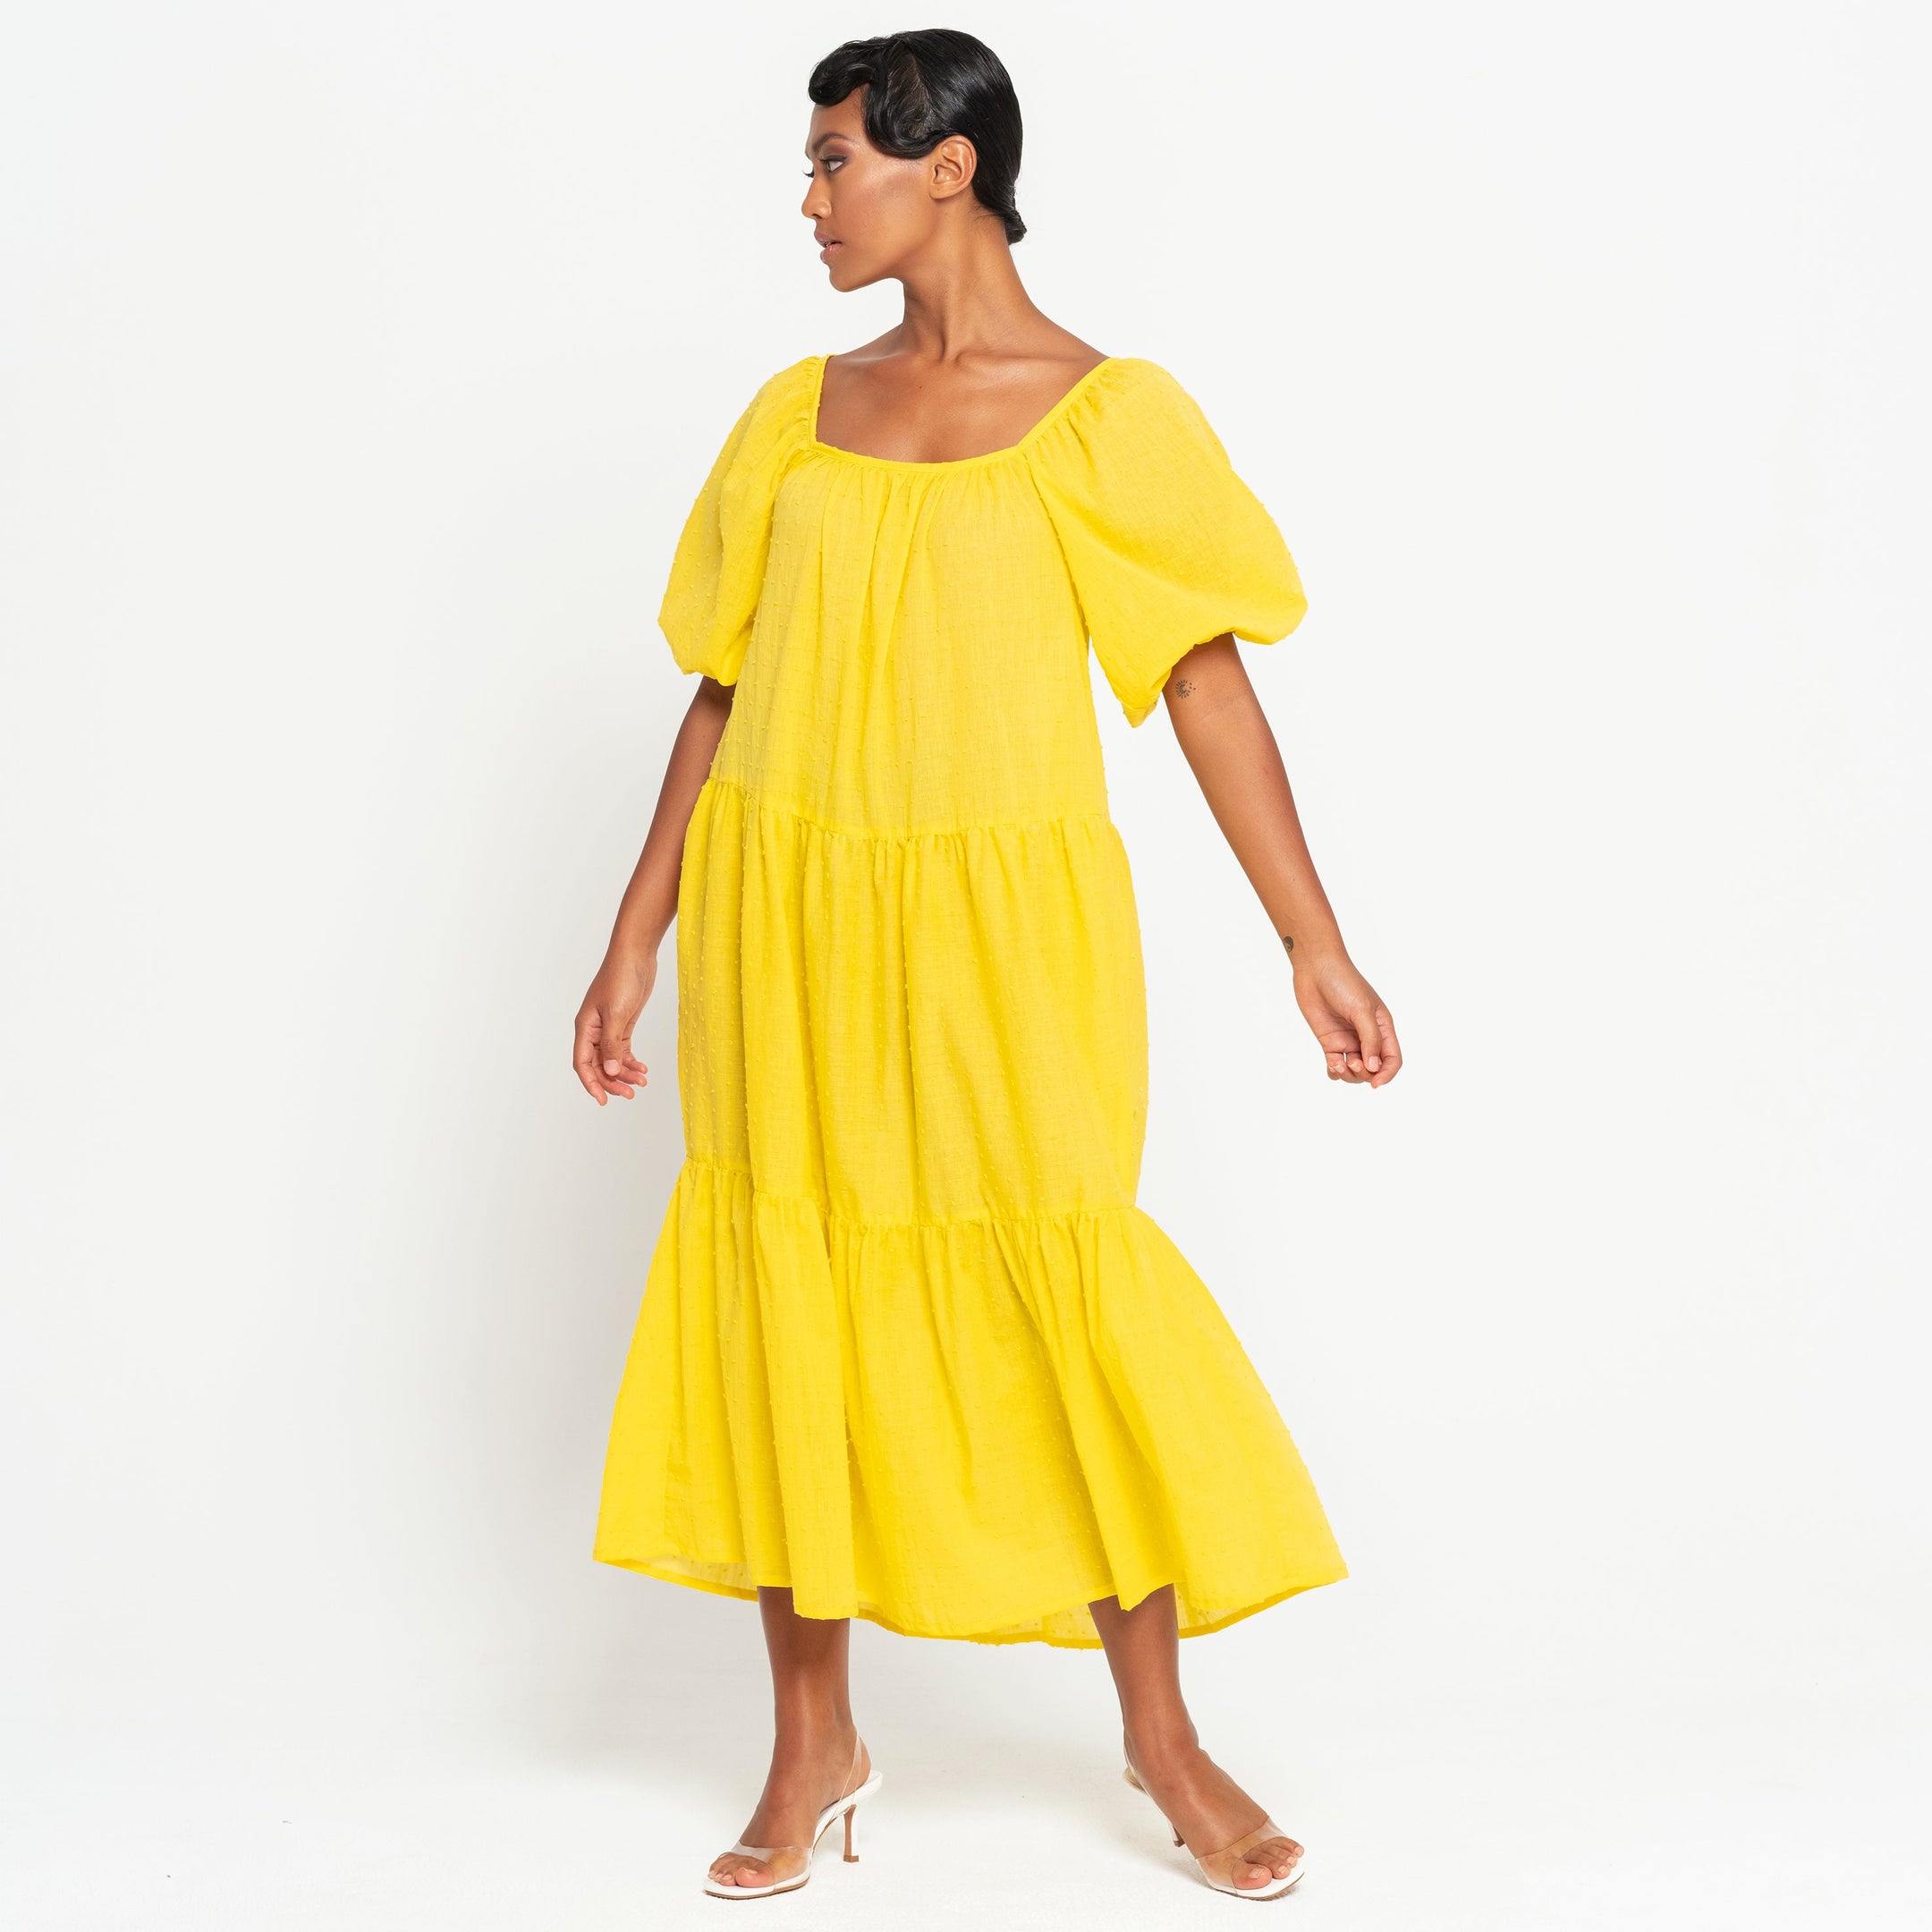 Buy ROSEMARY Dotted Cotton Dress, in Sunflower Yellow by BrunnaCo